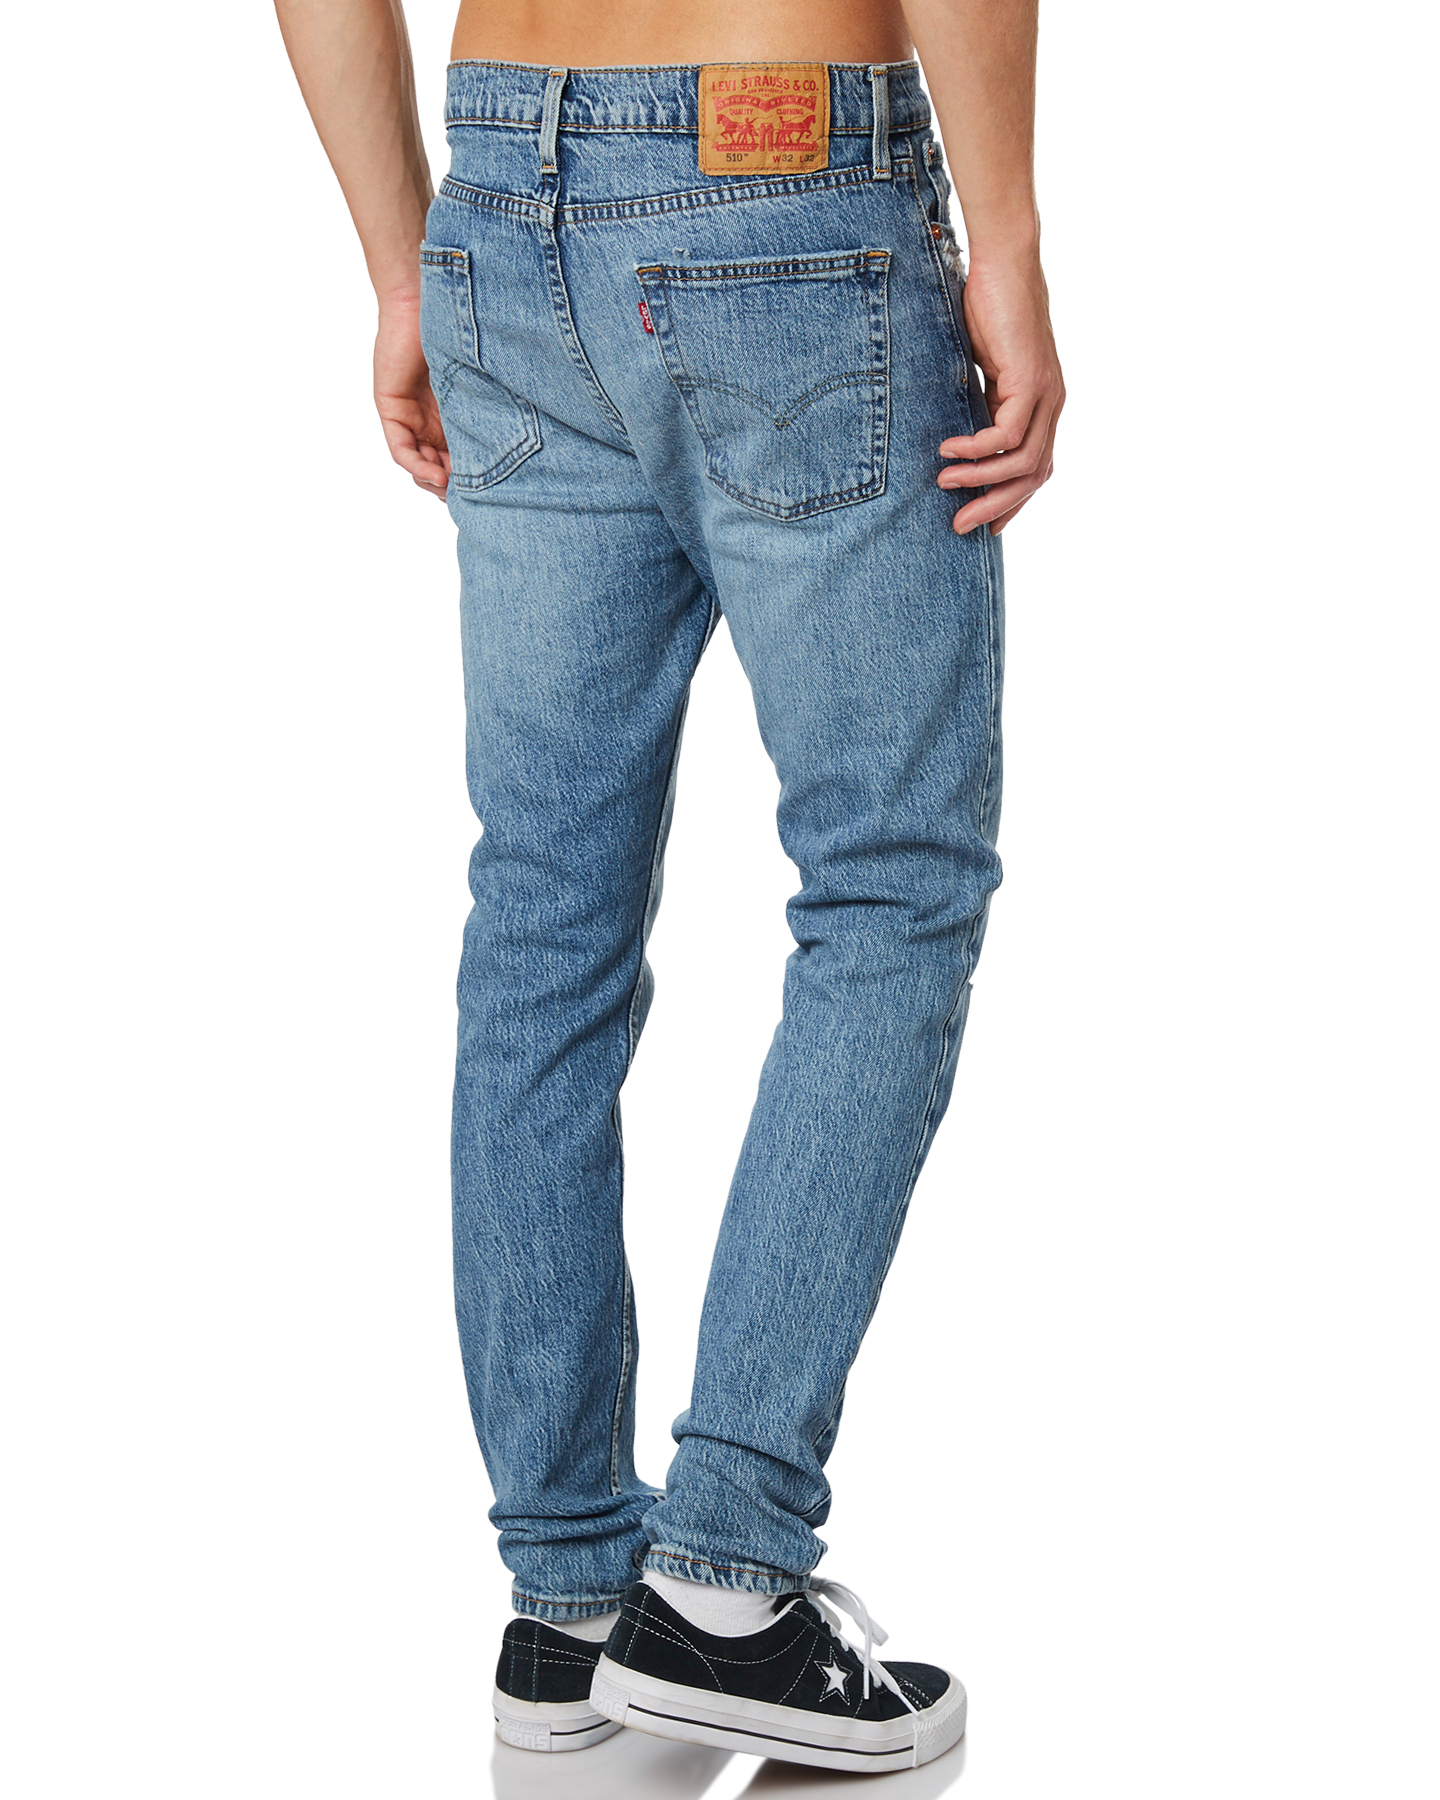 Levis Skinny Jeans Mens : The all Levi rear look. | Levi jeans outfit ...